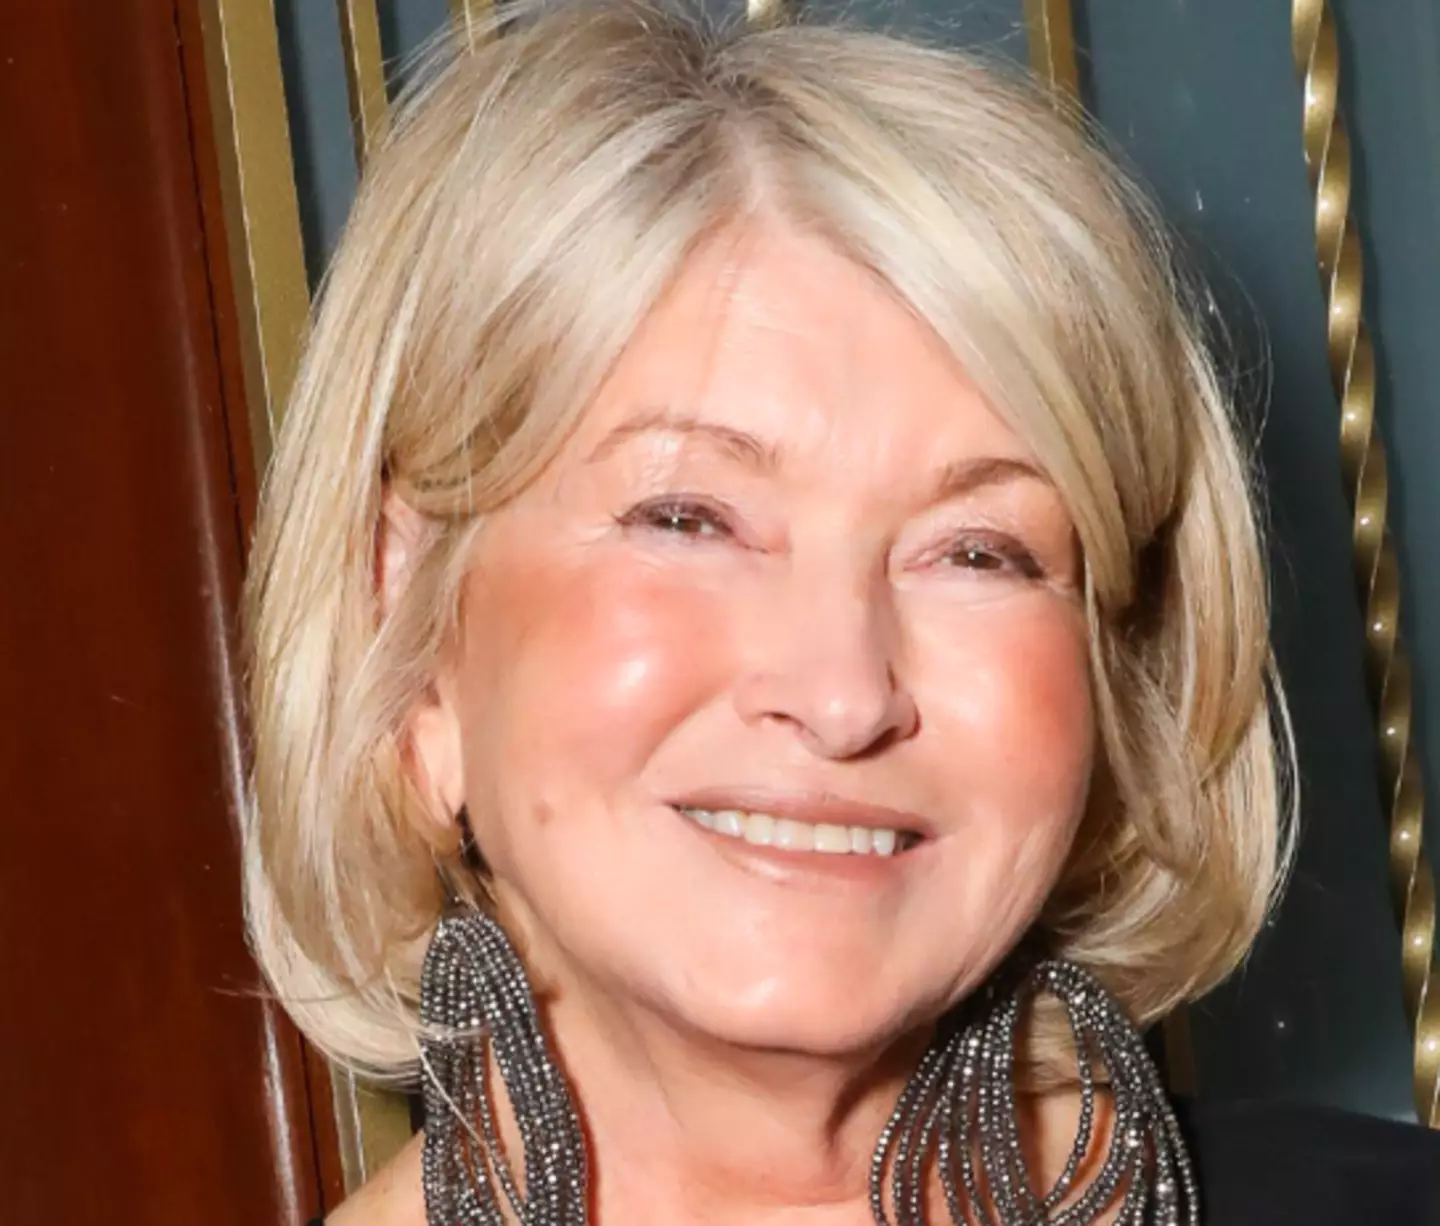 Martha Stewart sparked mixed responses with her cover.